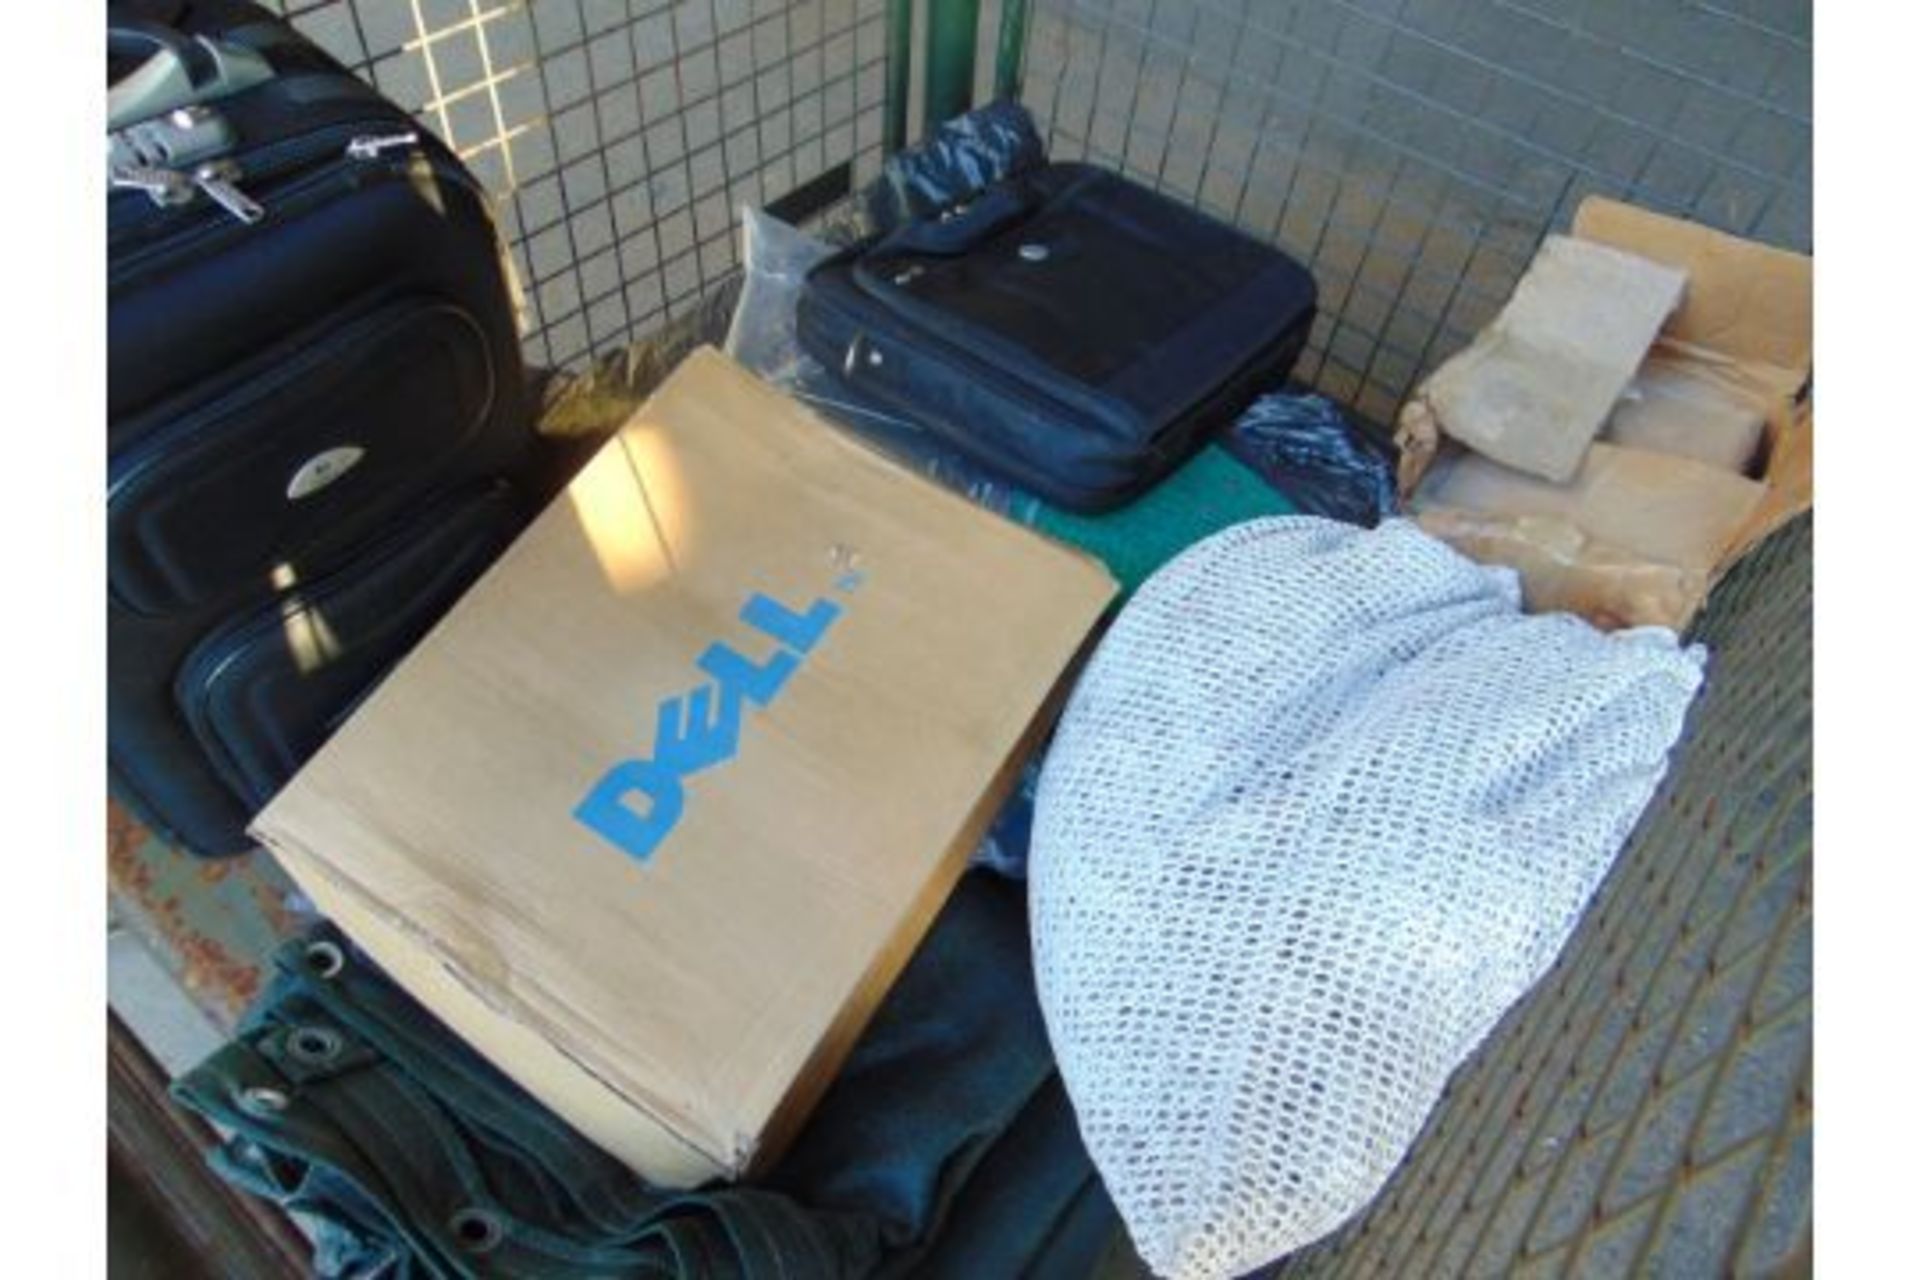 1 x Stillage New Unused DELL Laptop Bags, Canvas Sheets, Carry on Bag etc - Image 4 of 6